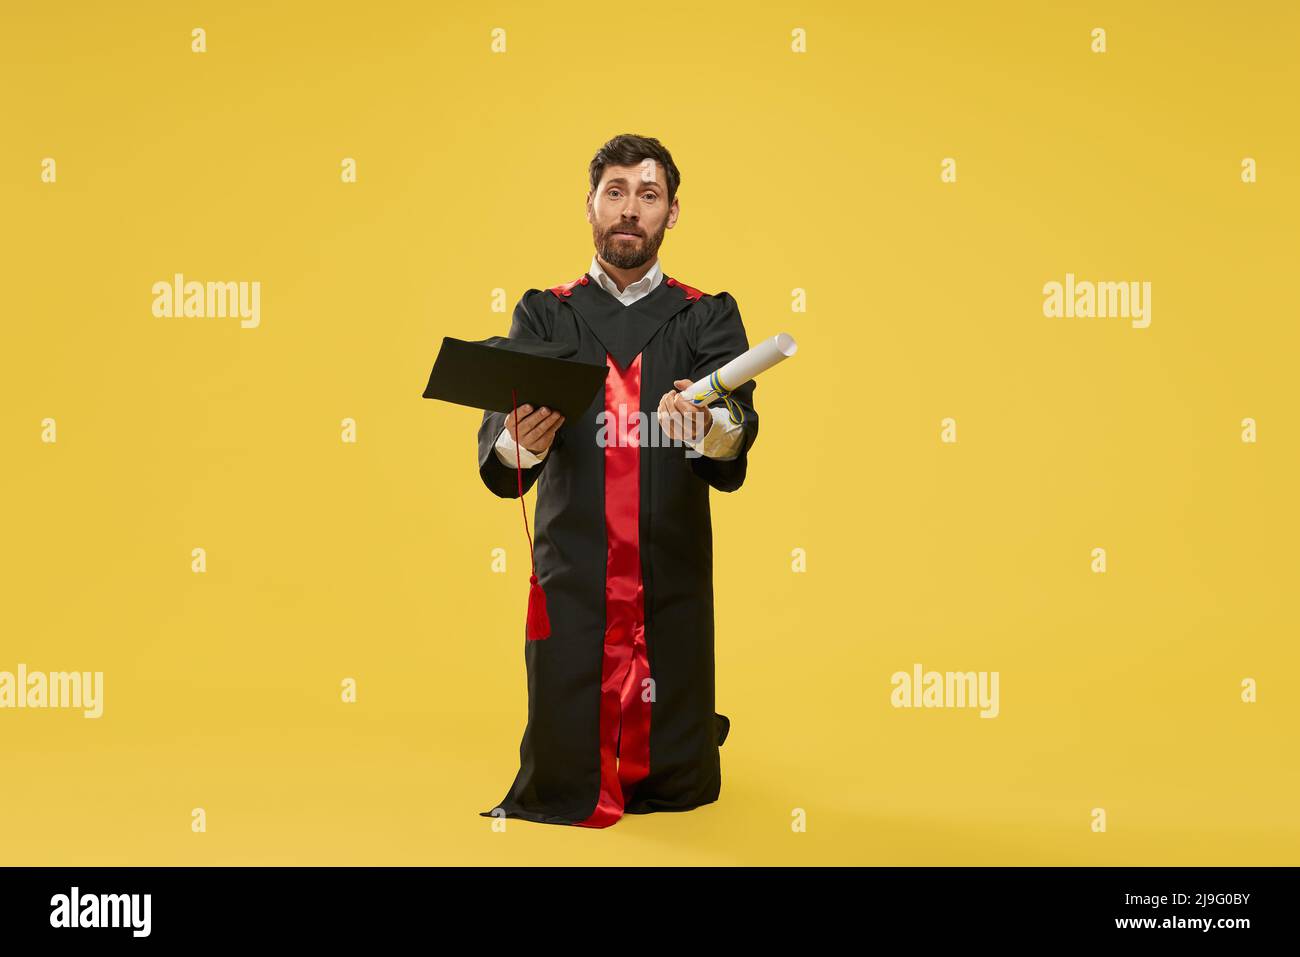 Front view of student with beard standing on knees, begging. Master, bachelor wearing graduate gown, holding diploma and mortarboard. Isolated on yellow studio background. Stock Photo